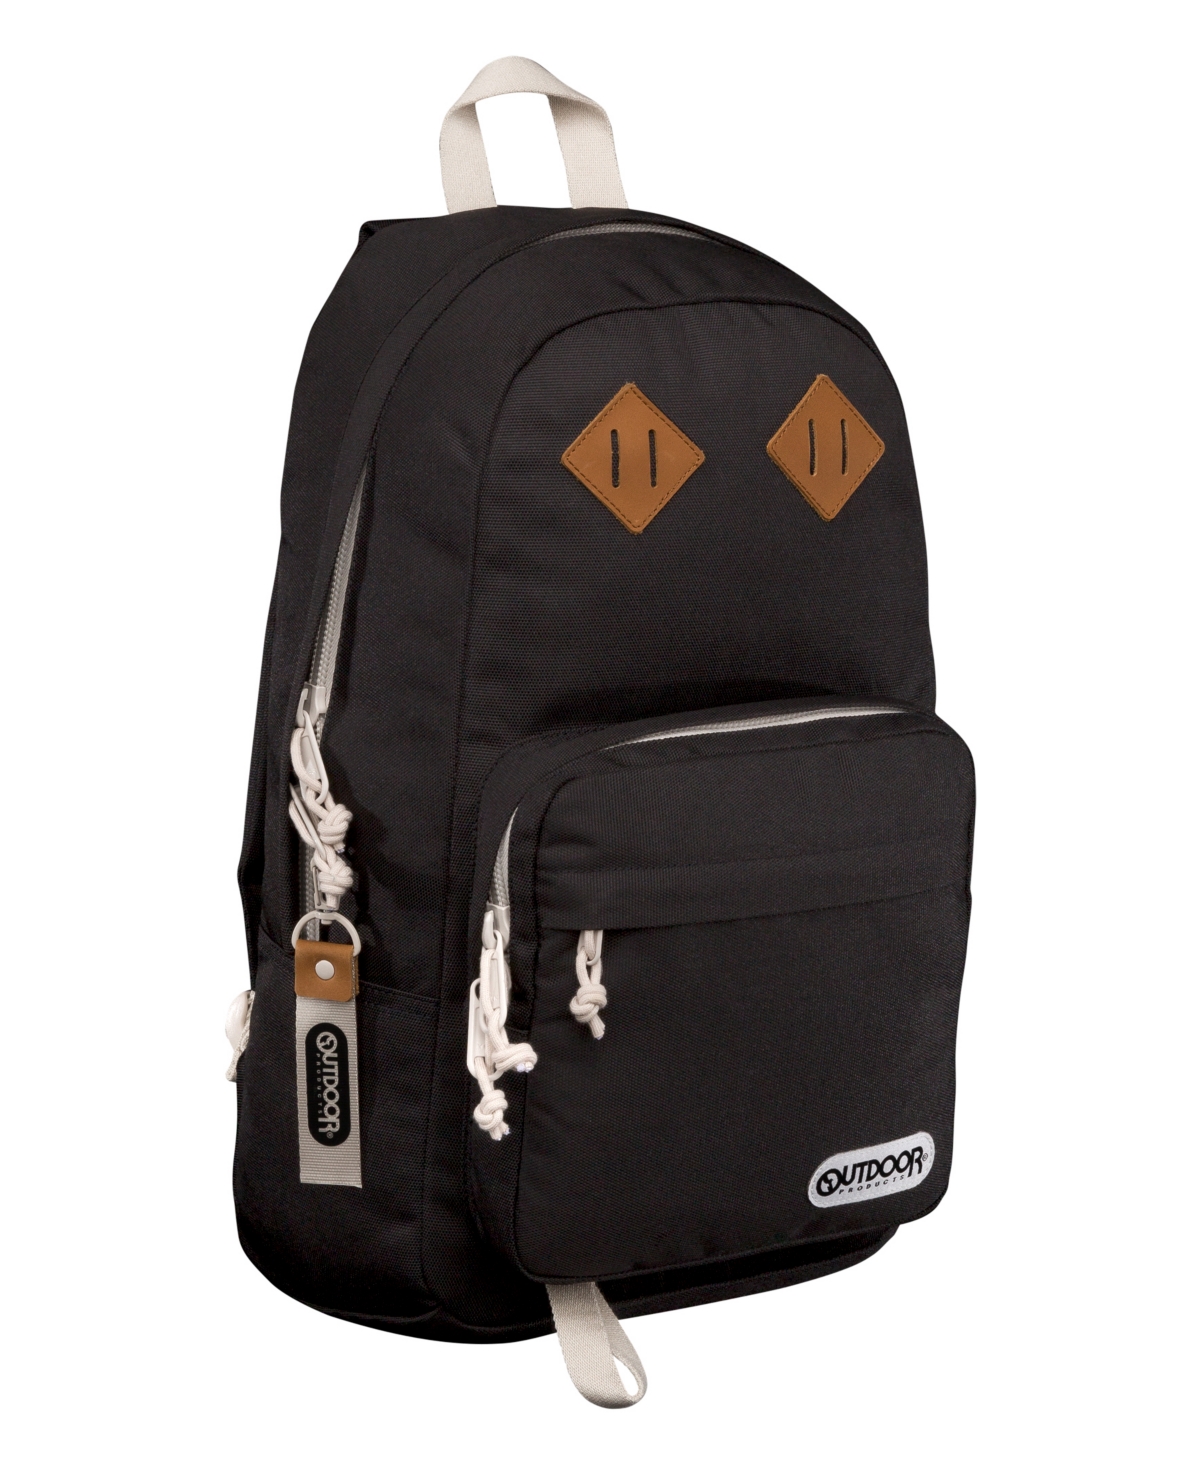 Outdoor Products Sierra Day Backpack In Black